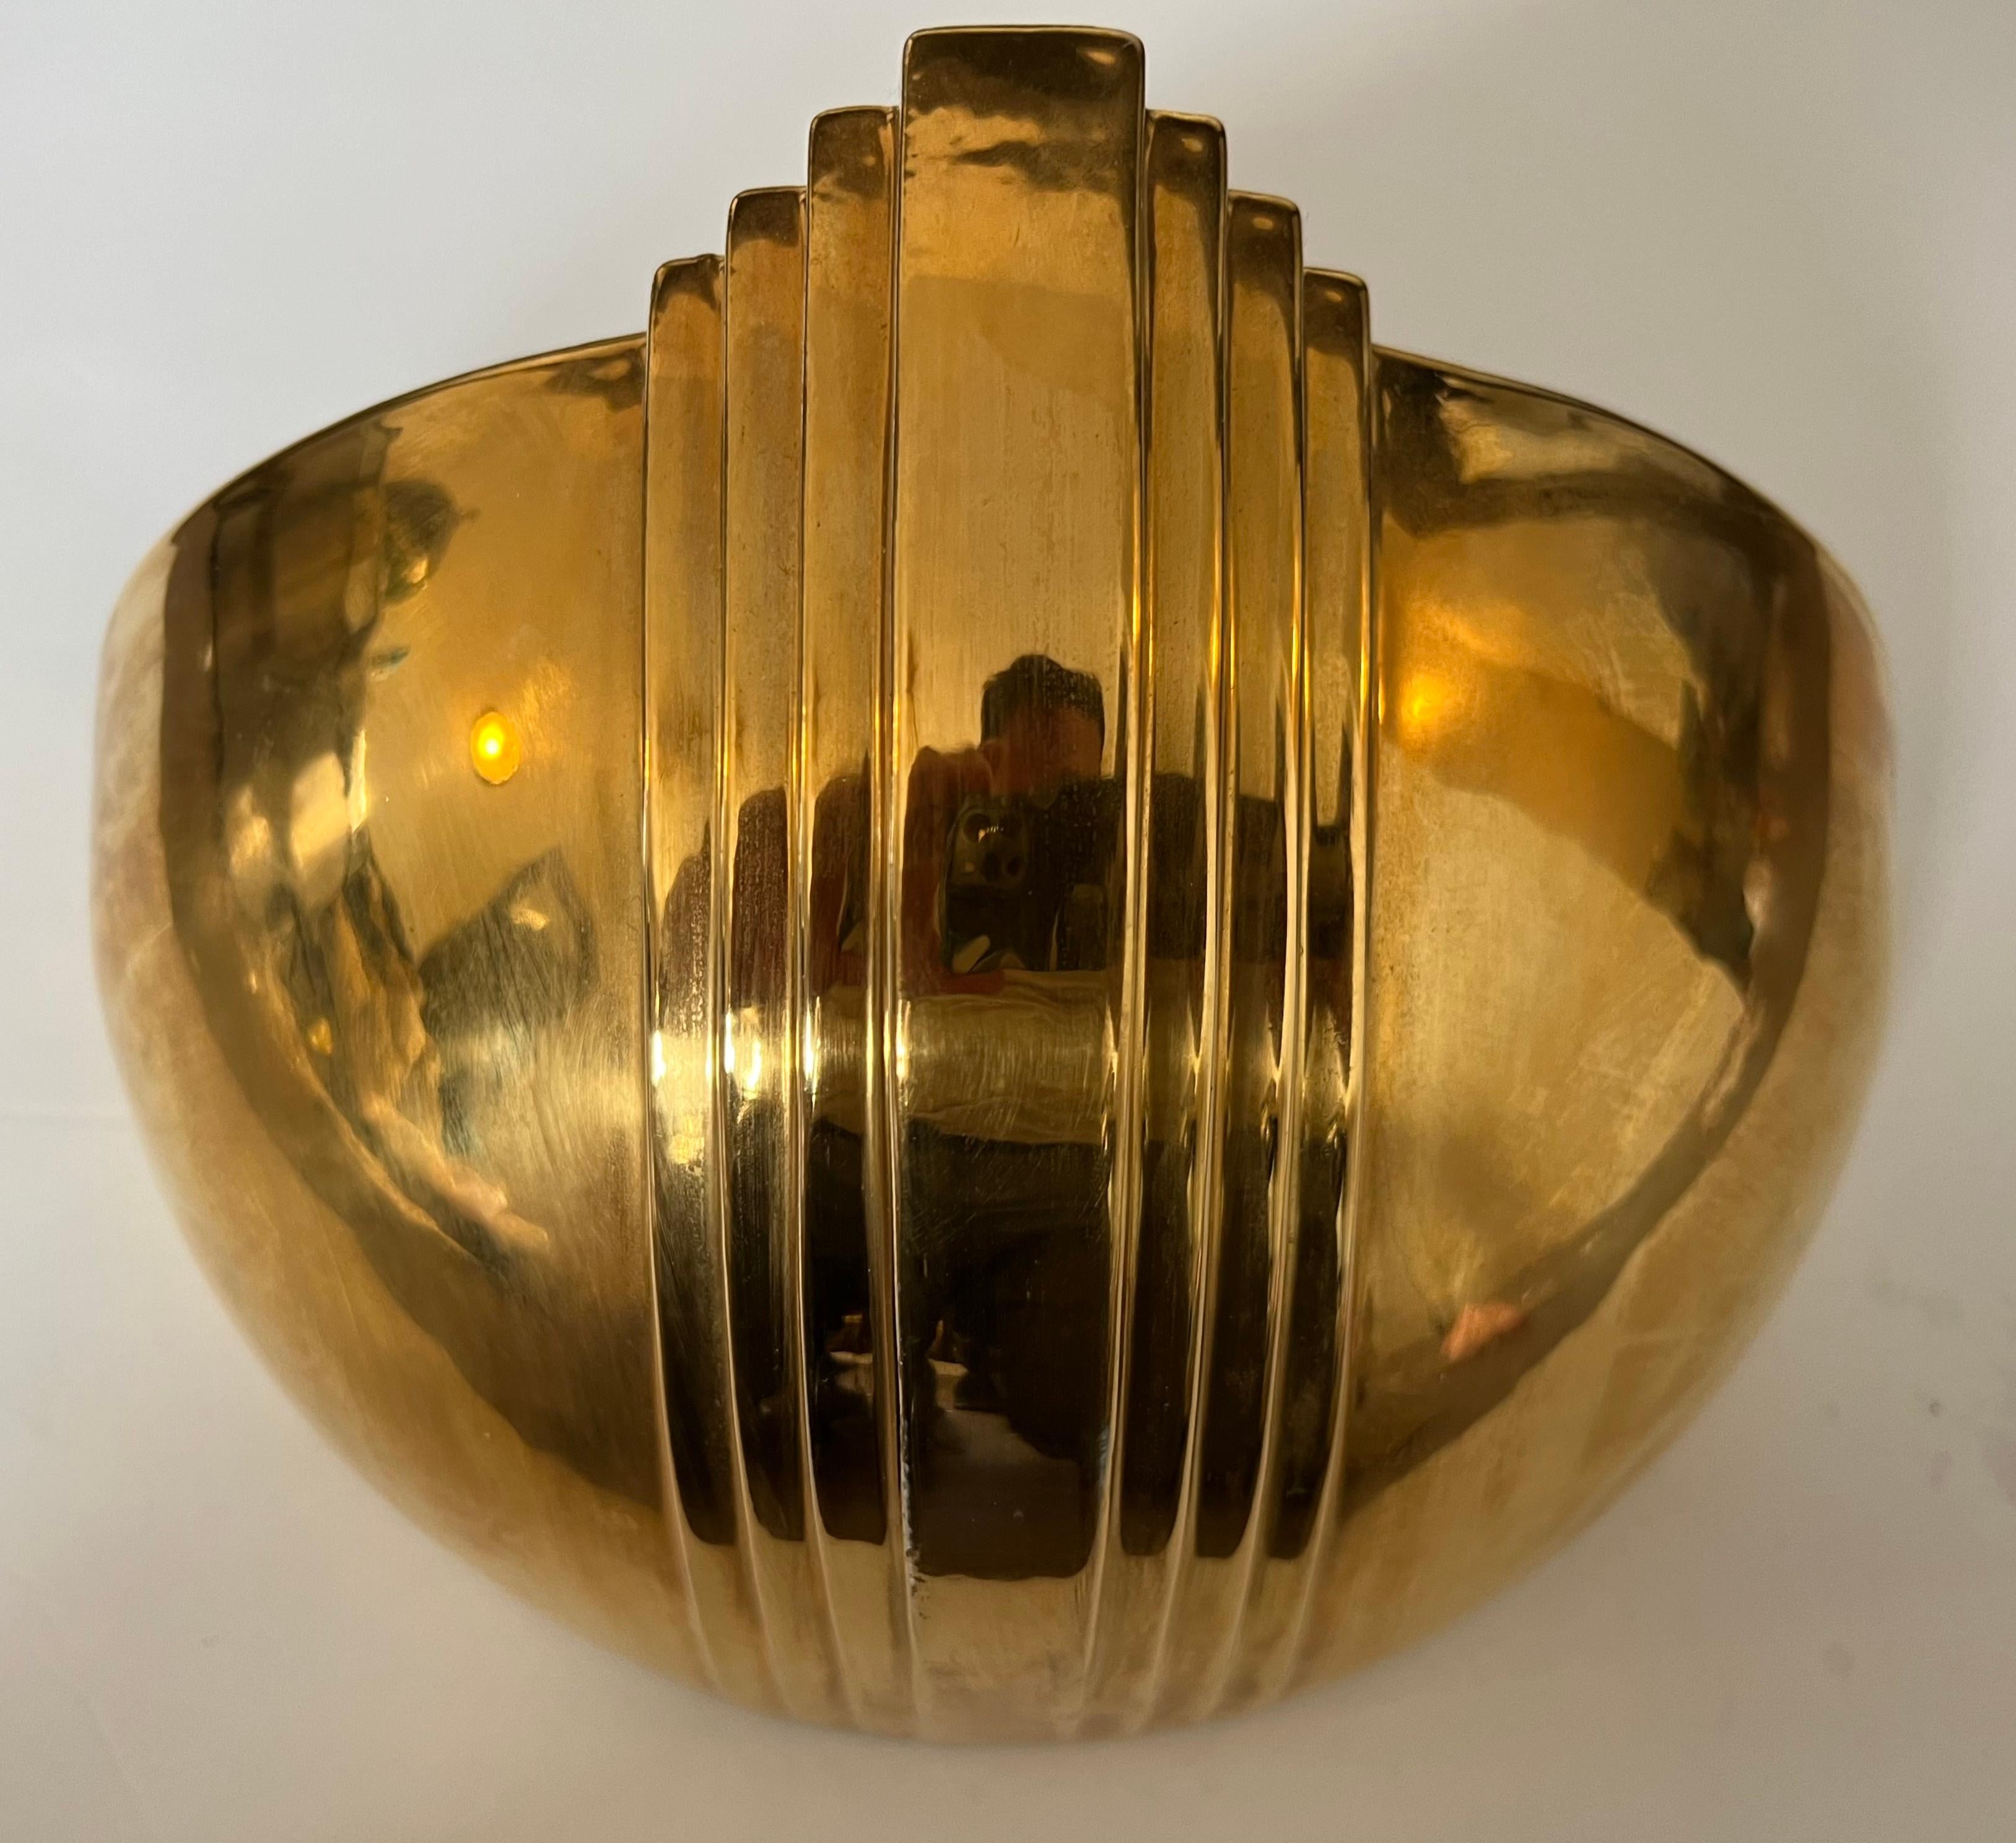 A French golden ceramic Art Deco style wall light. Rewired.